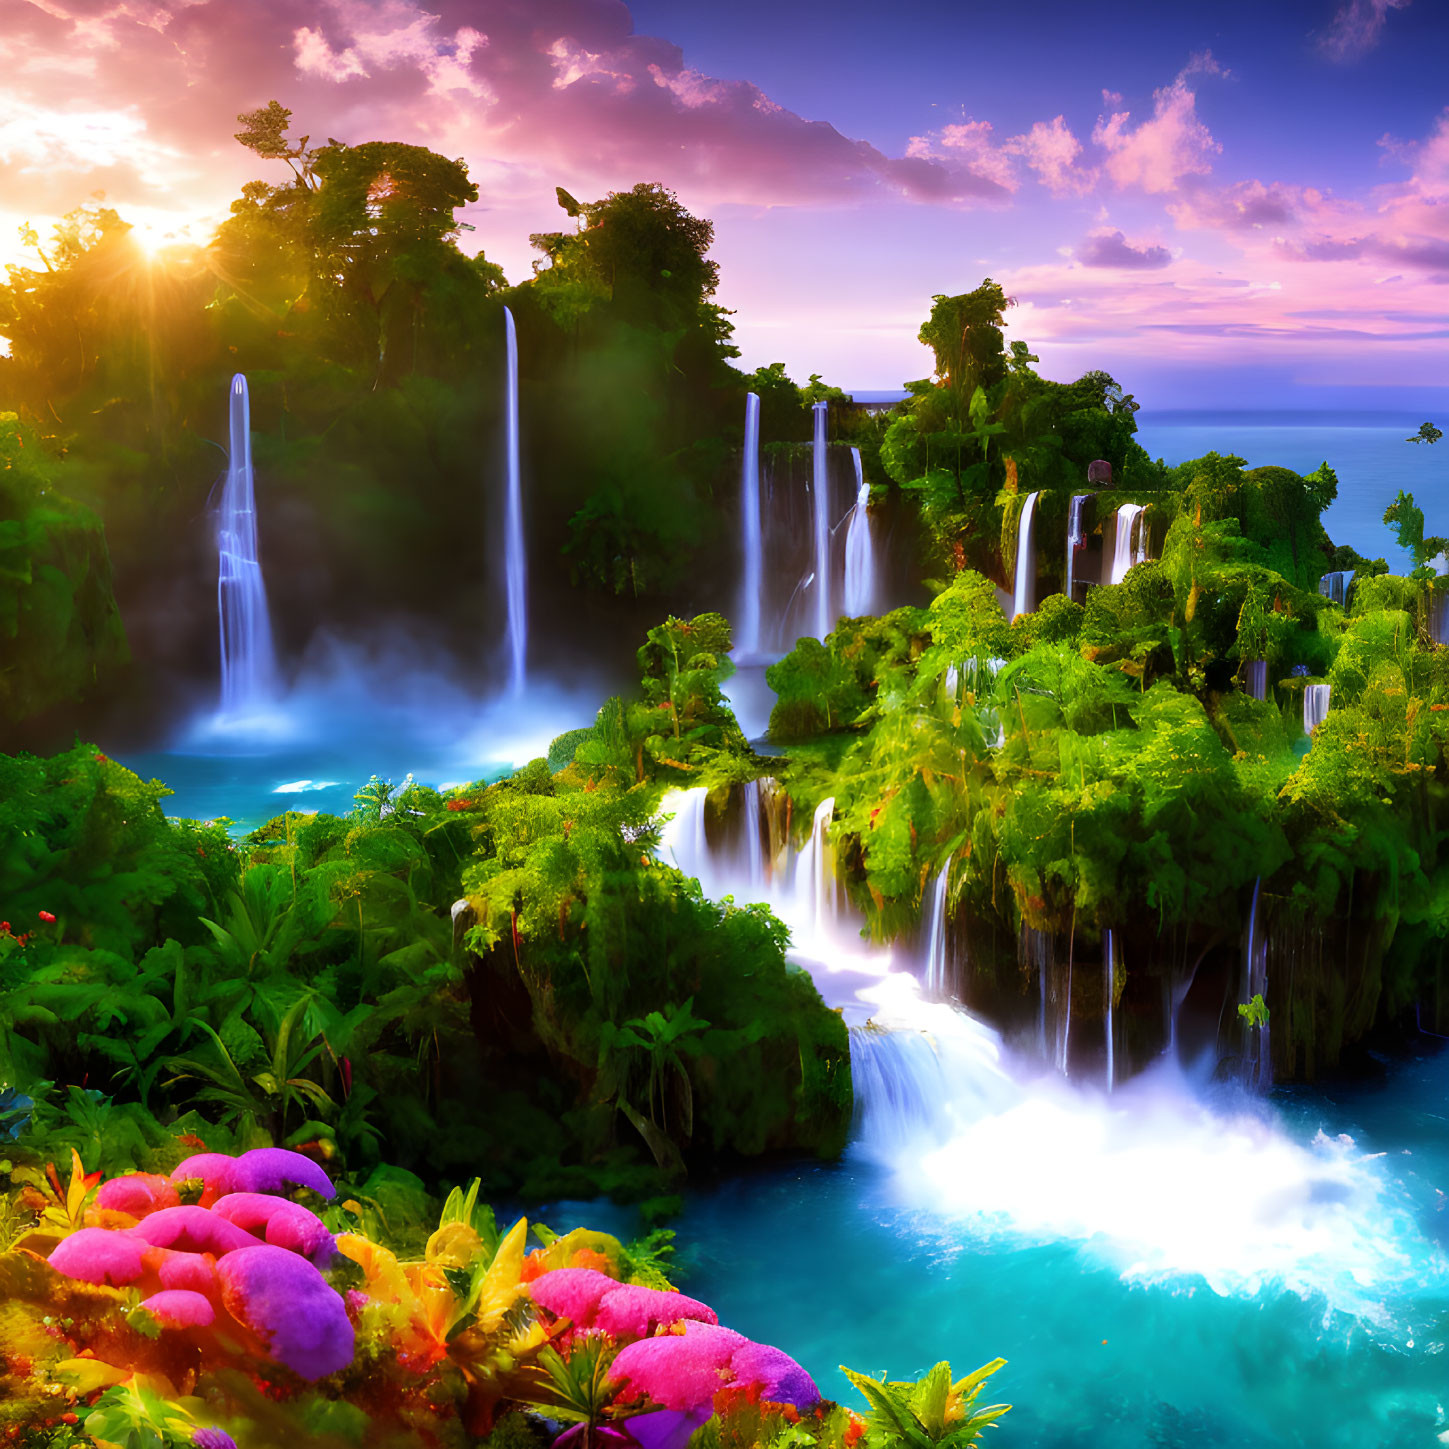 Tropical Waterfall Scene with Pink Flowers and Sunset Sky